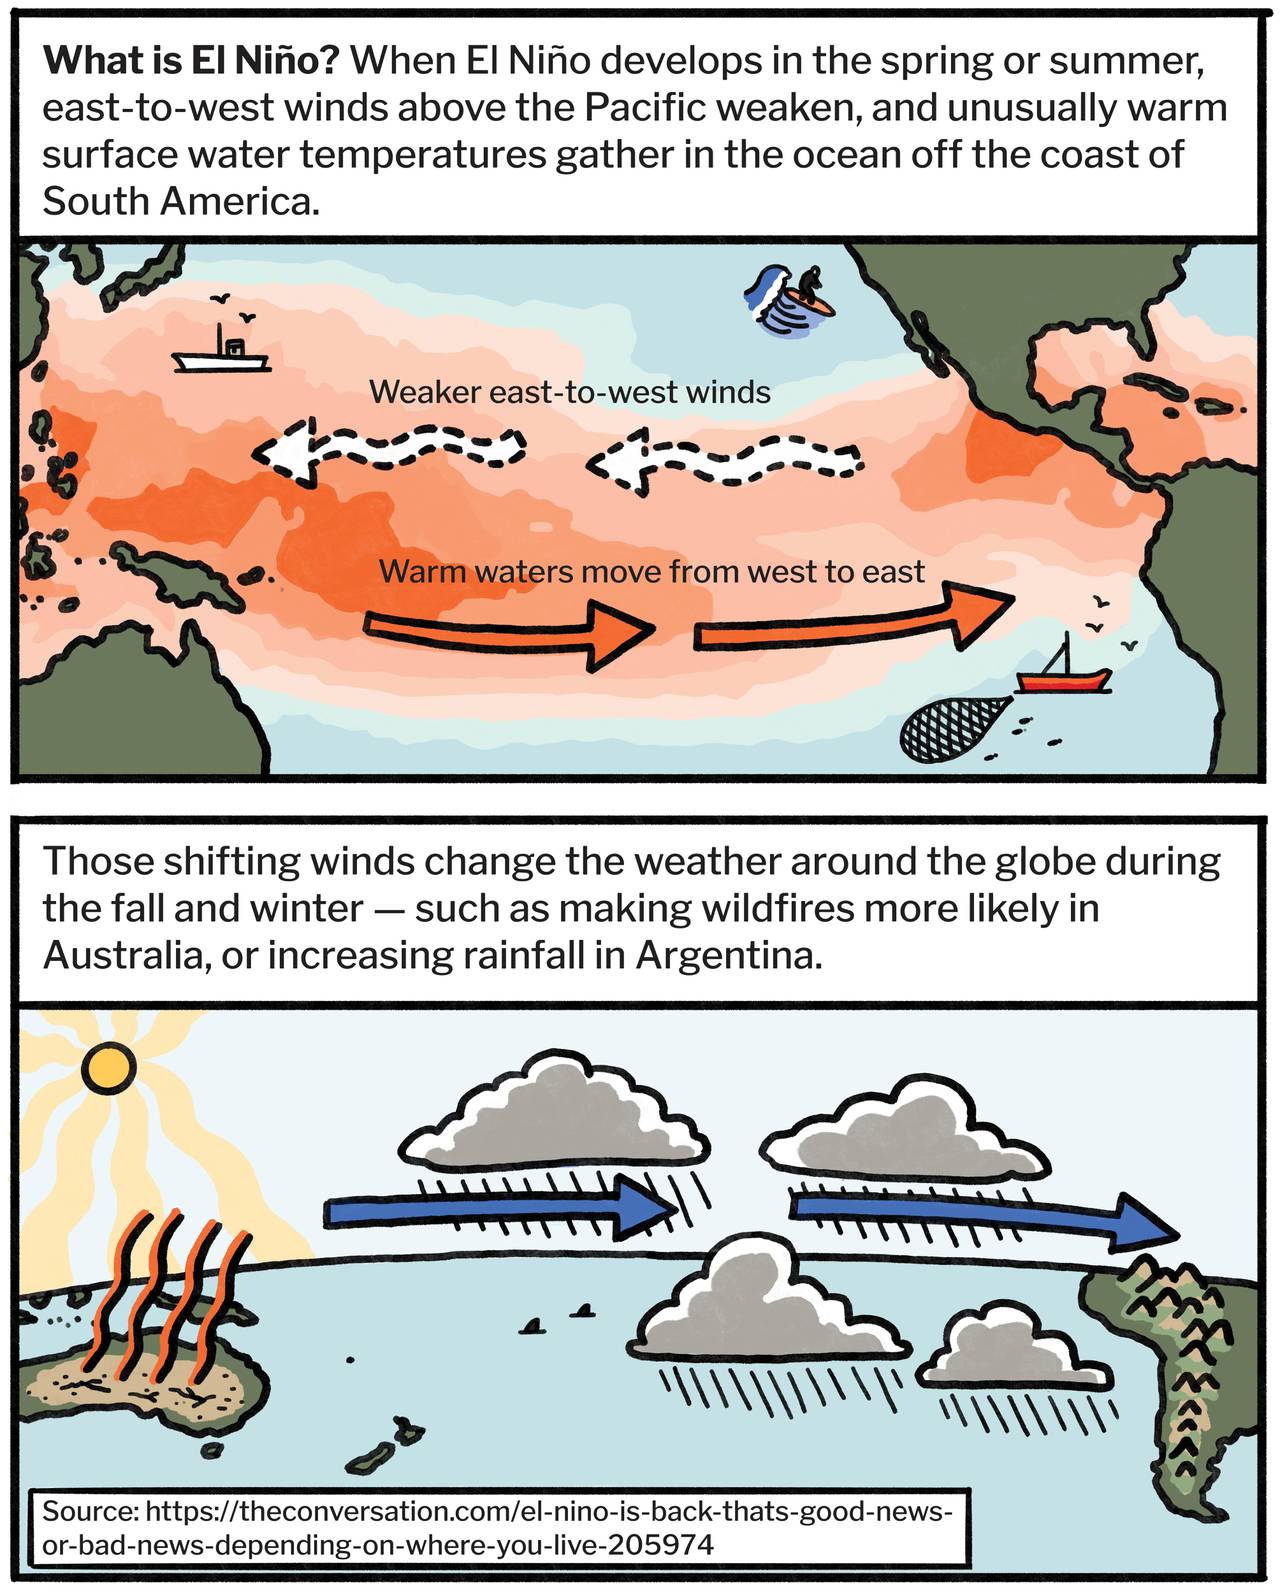 What is El Niño? When El Niño develops in the spring or summer, east-to-west winds above the Pacific weaken, and unusually warm surface water temperatures gather in the ocean off the coast of South America. Those shifting winds change the weather around the globe during the fall and winter — such as making wildfires more likely in Australia or increasing rainfall in Argentina.